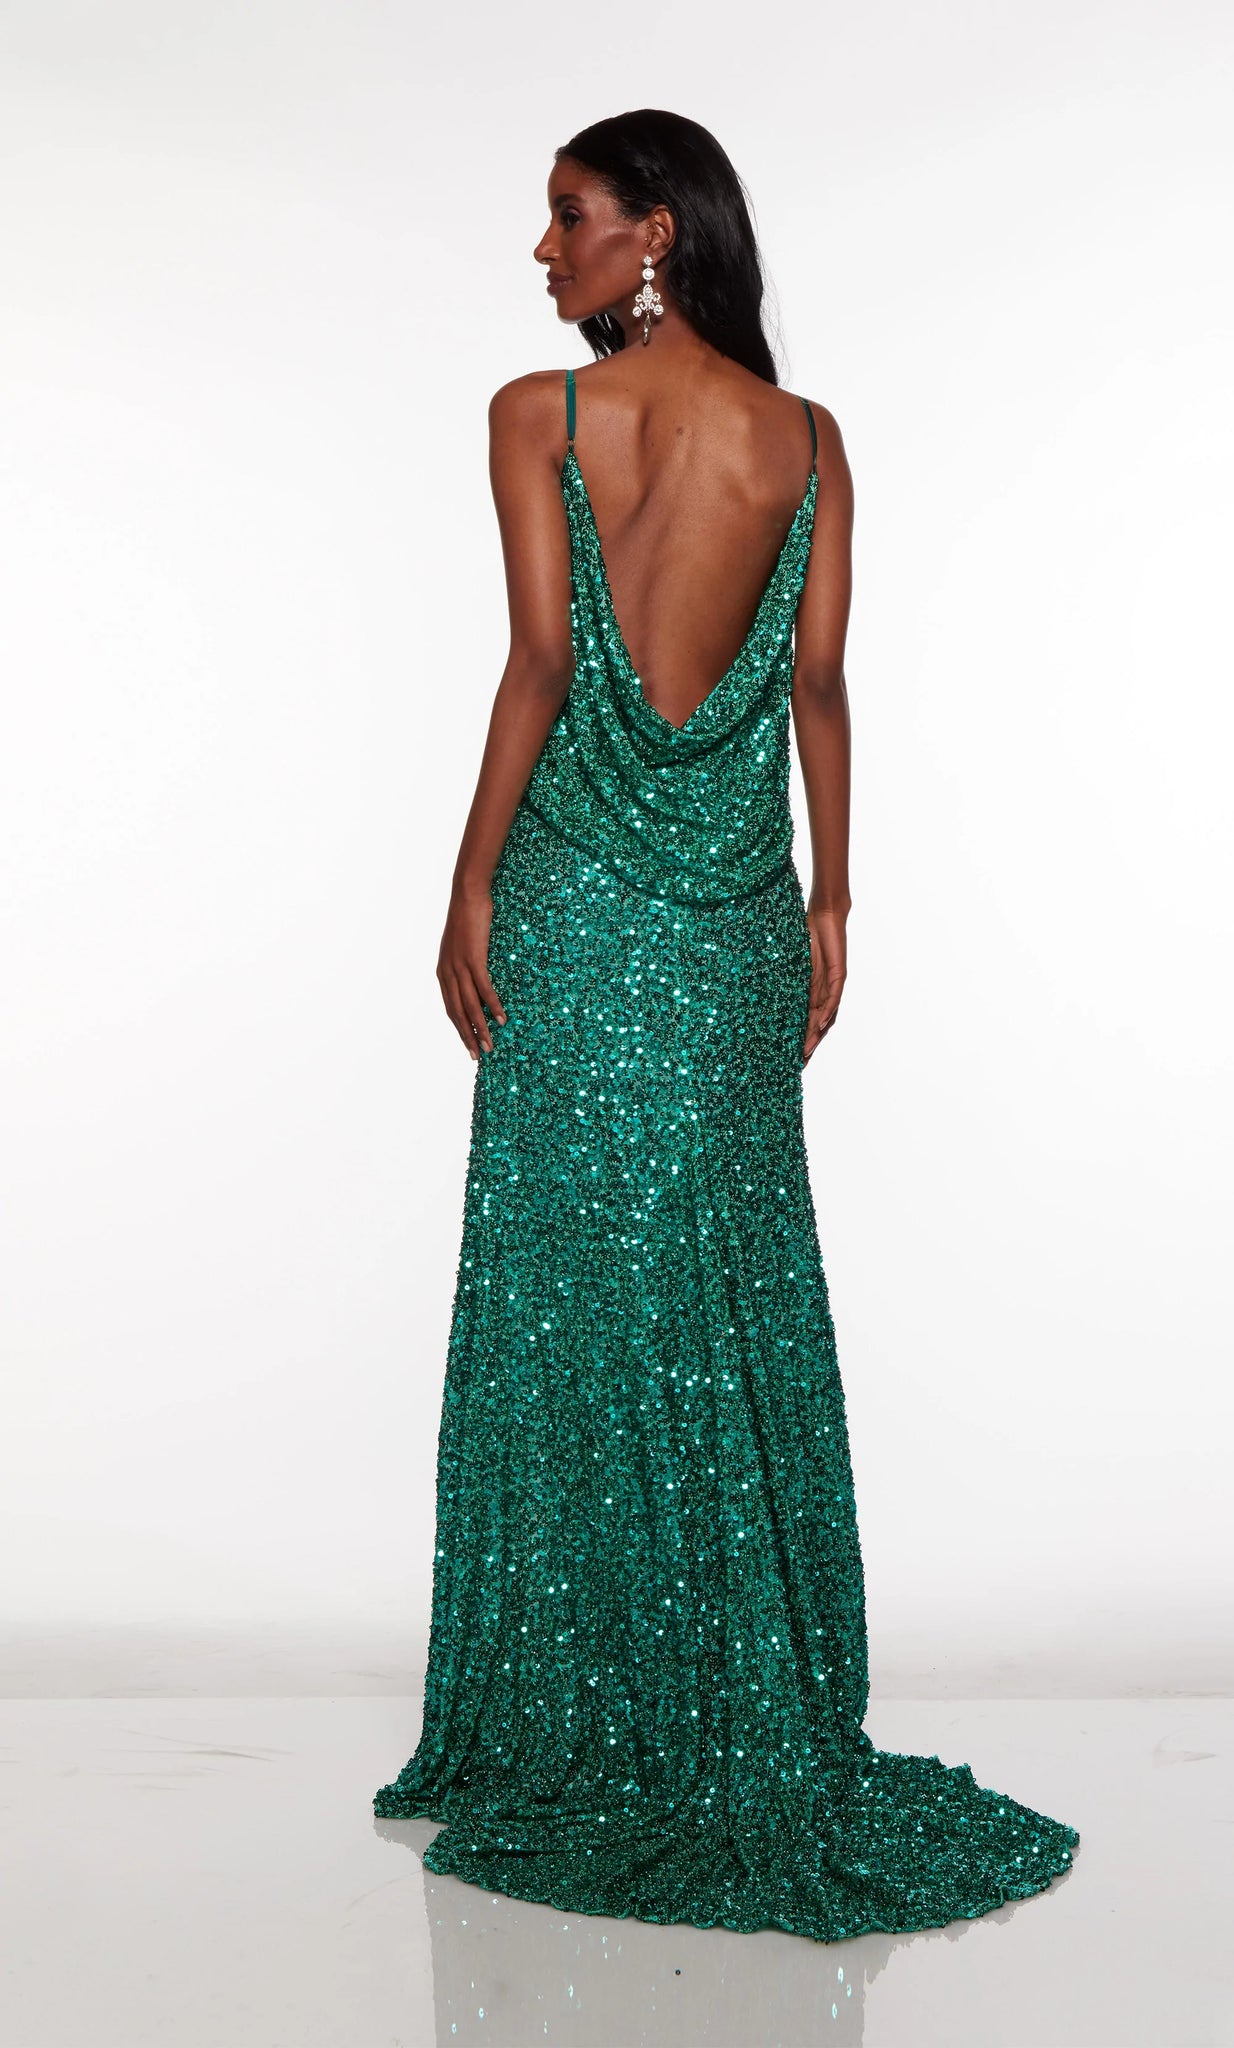 Live out your celebrity dream while wearing captivating Alyce Paris dress 61390. Gorgeous fitted dress displays a cowl neckline that matches the stunning open back cowl detail. Entirely embellished in shimmering sequins, this ravishing dress is accompanied by a high slit. Definitely a must have dress for your next event.